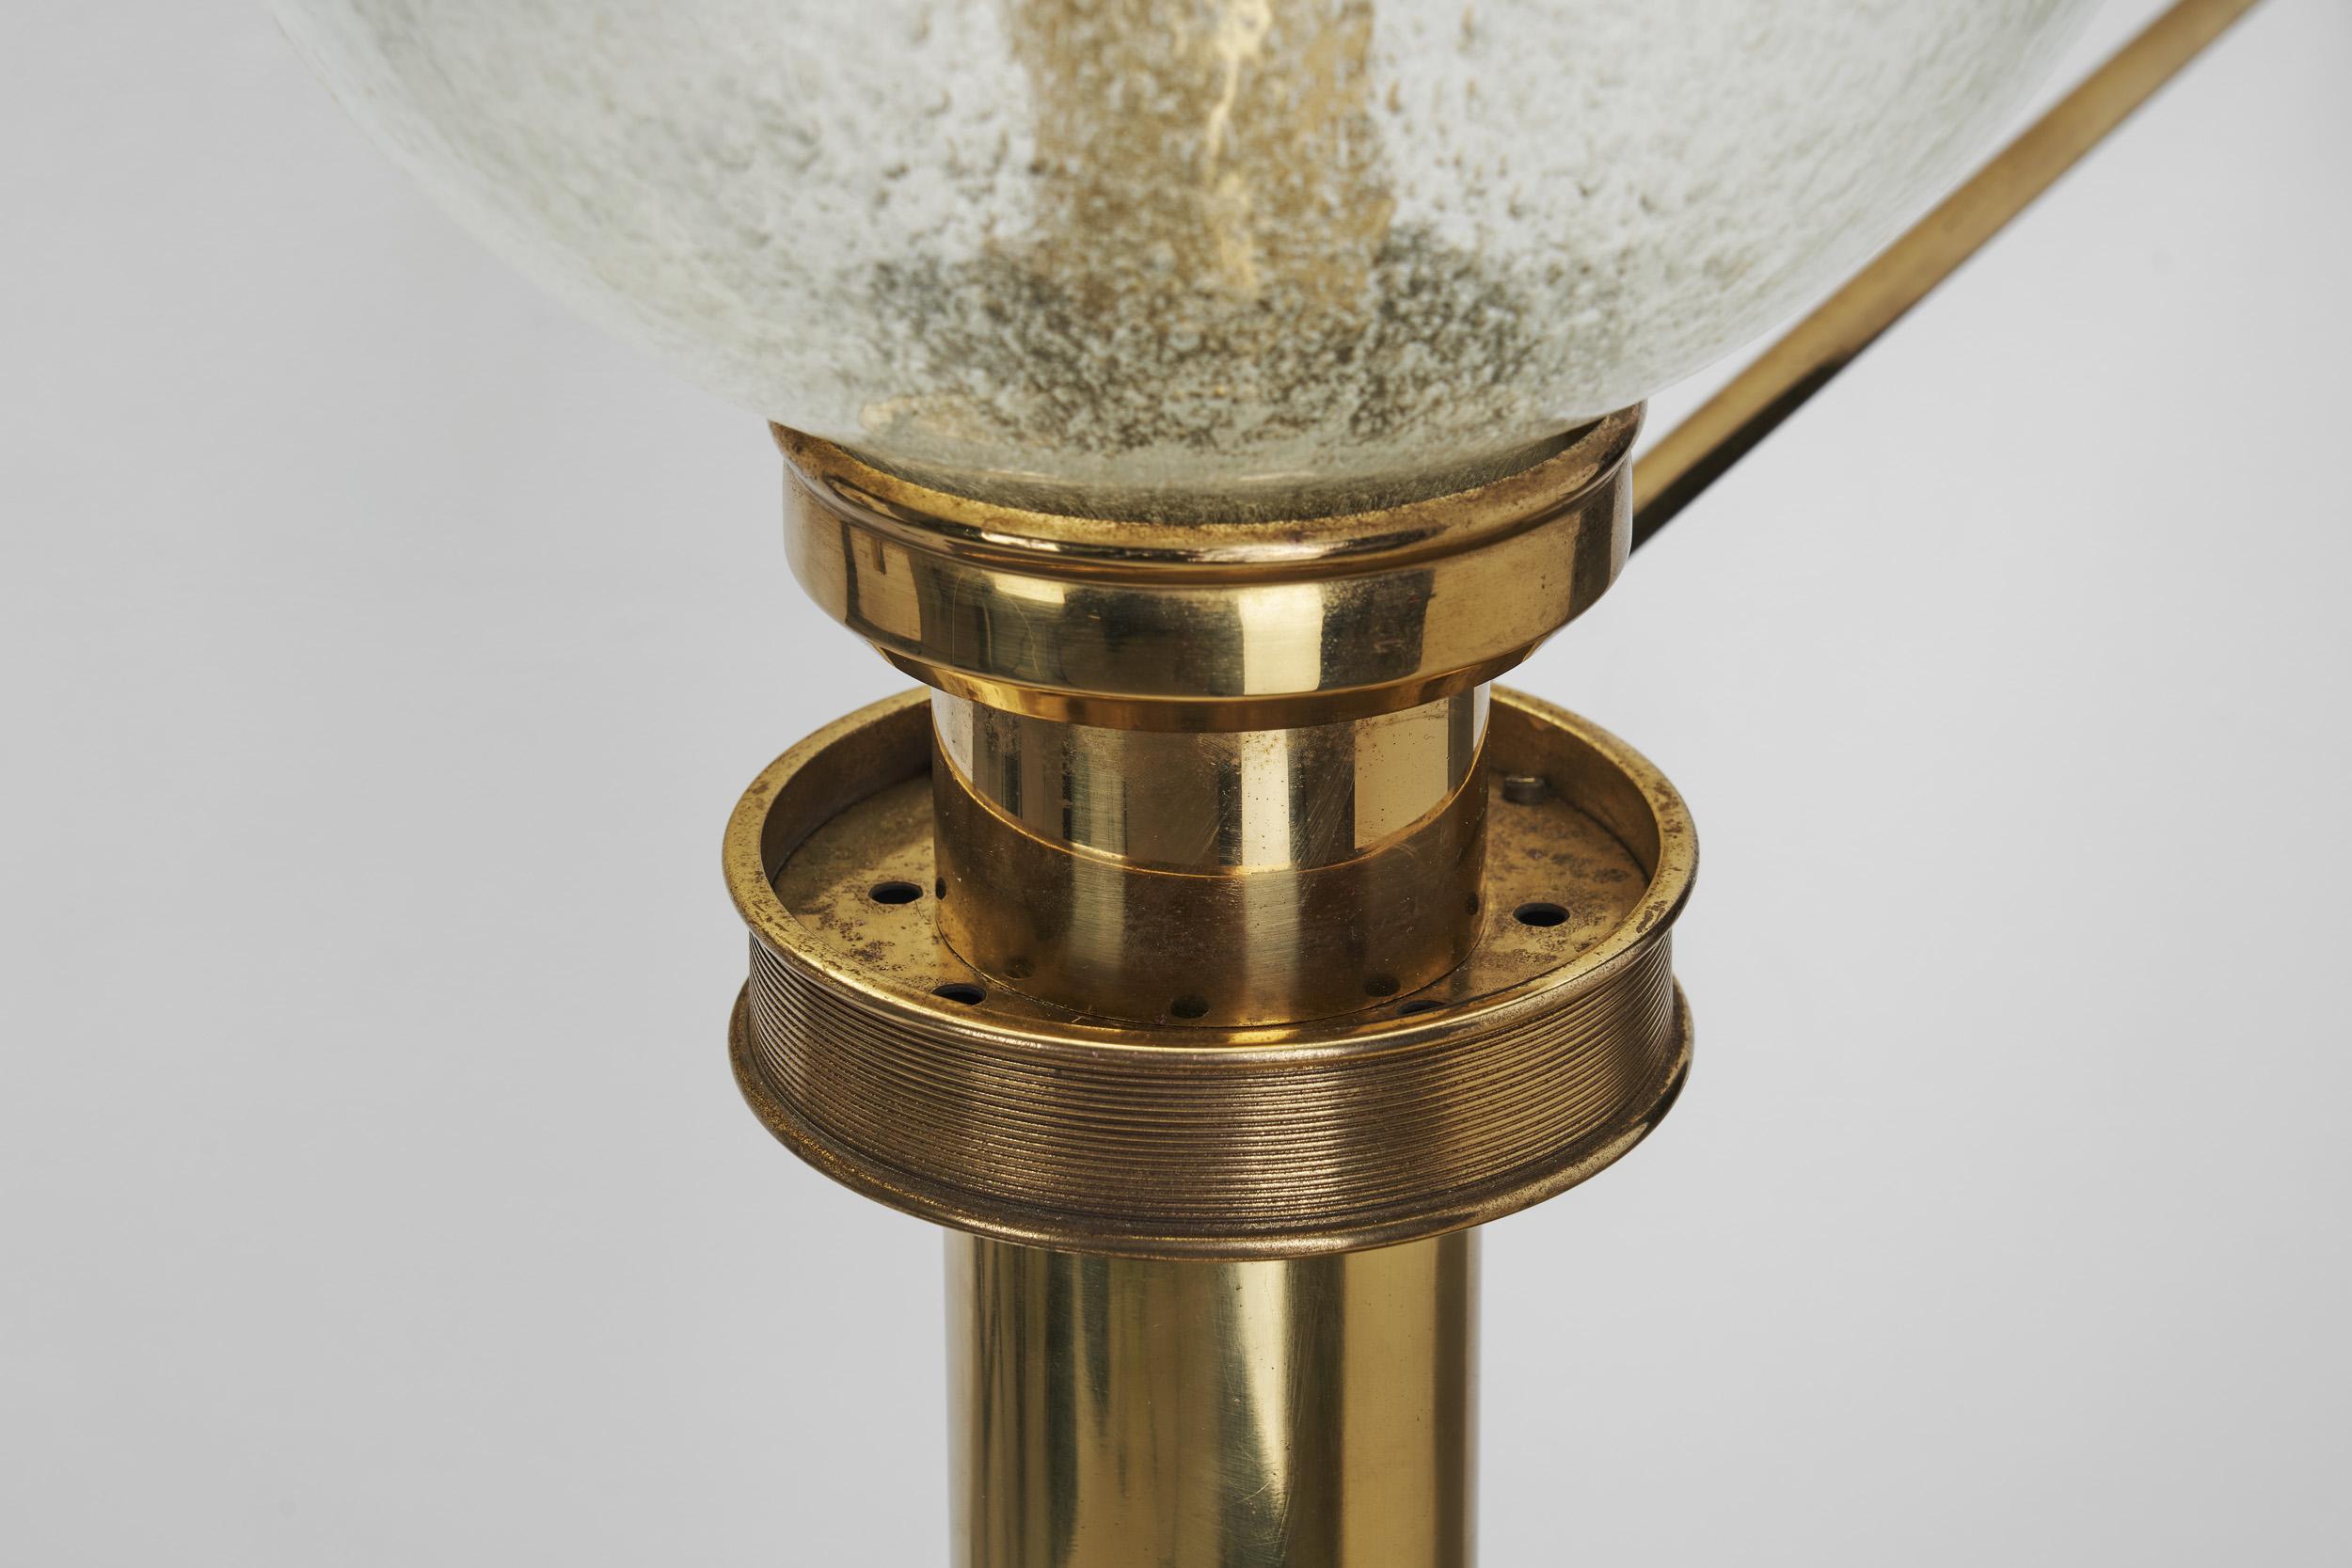 Large European Modern Wall Sconce in Brass & Bubble Glass, Europe circa 1950s For Sale 4